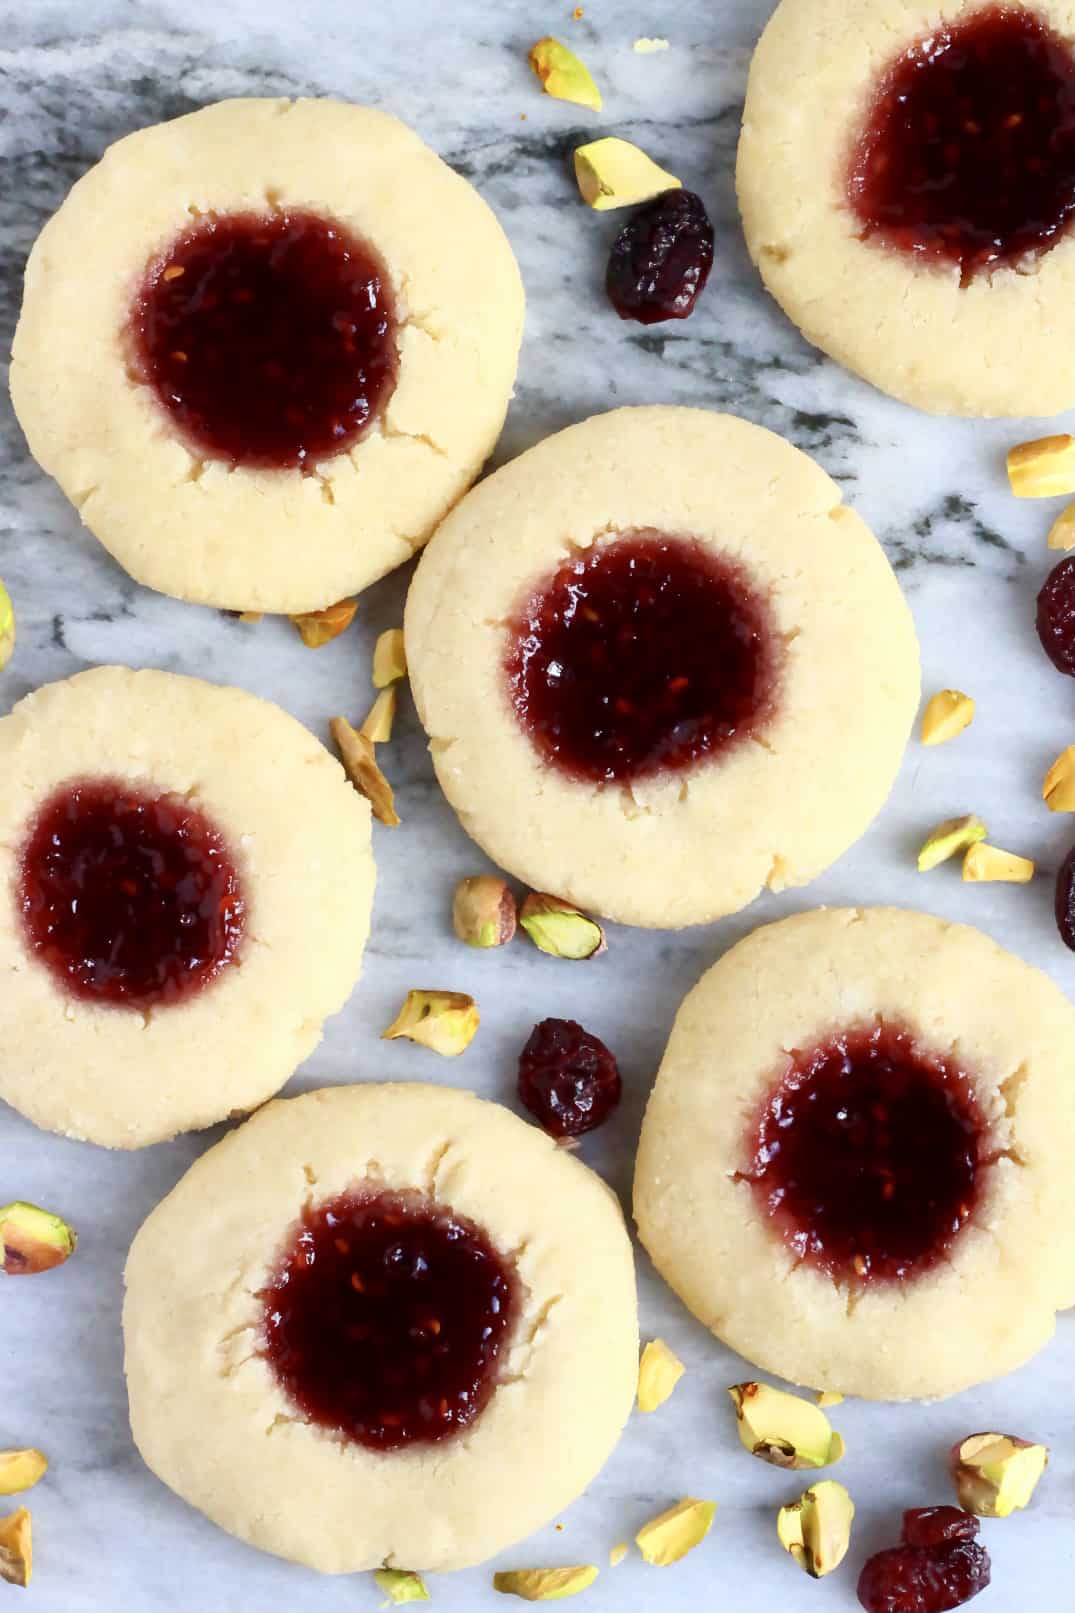 Six gluten-free vegan thumbprint cookies with raspberry jam on a marble background